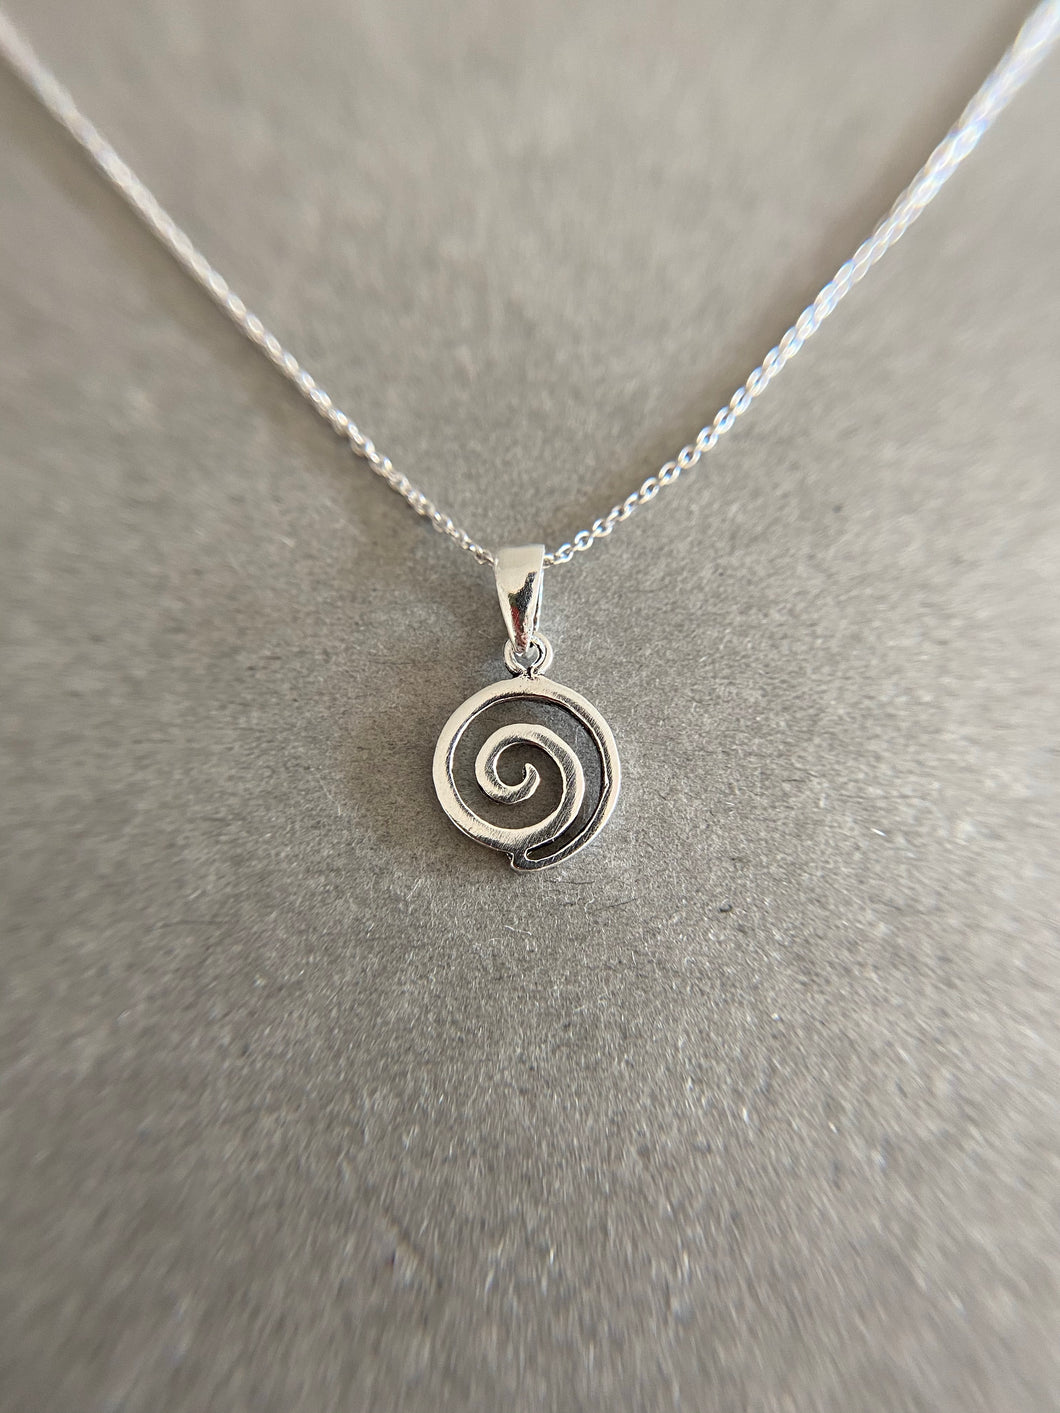 Sterling Silver Swirl Necklace [NS1005]